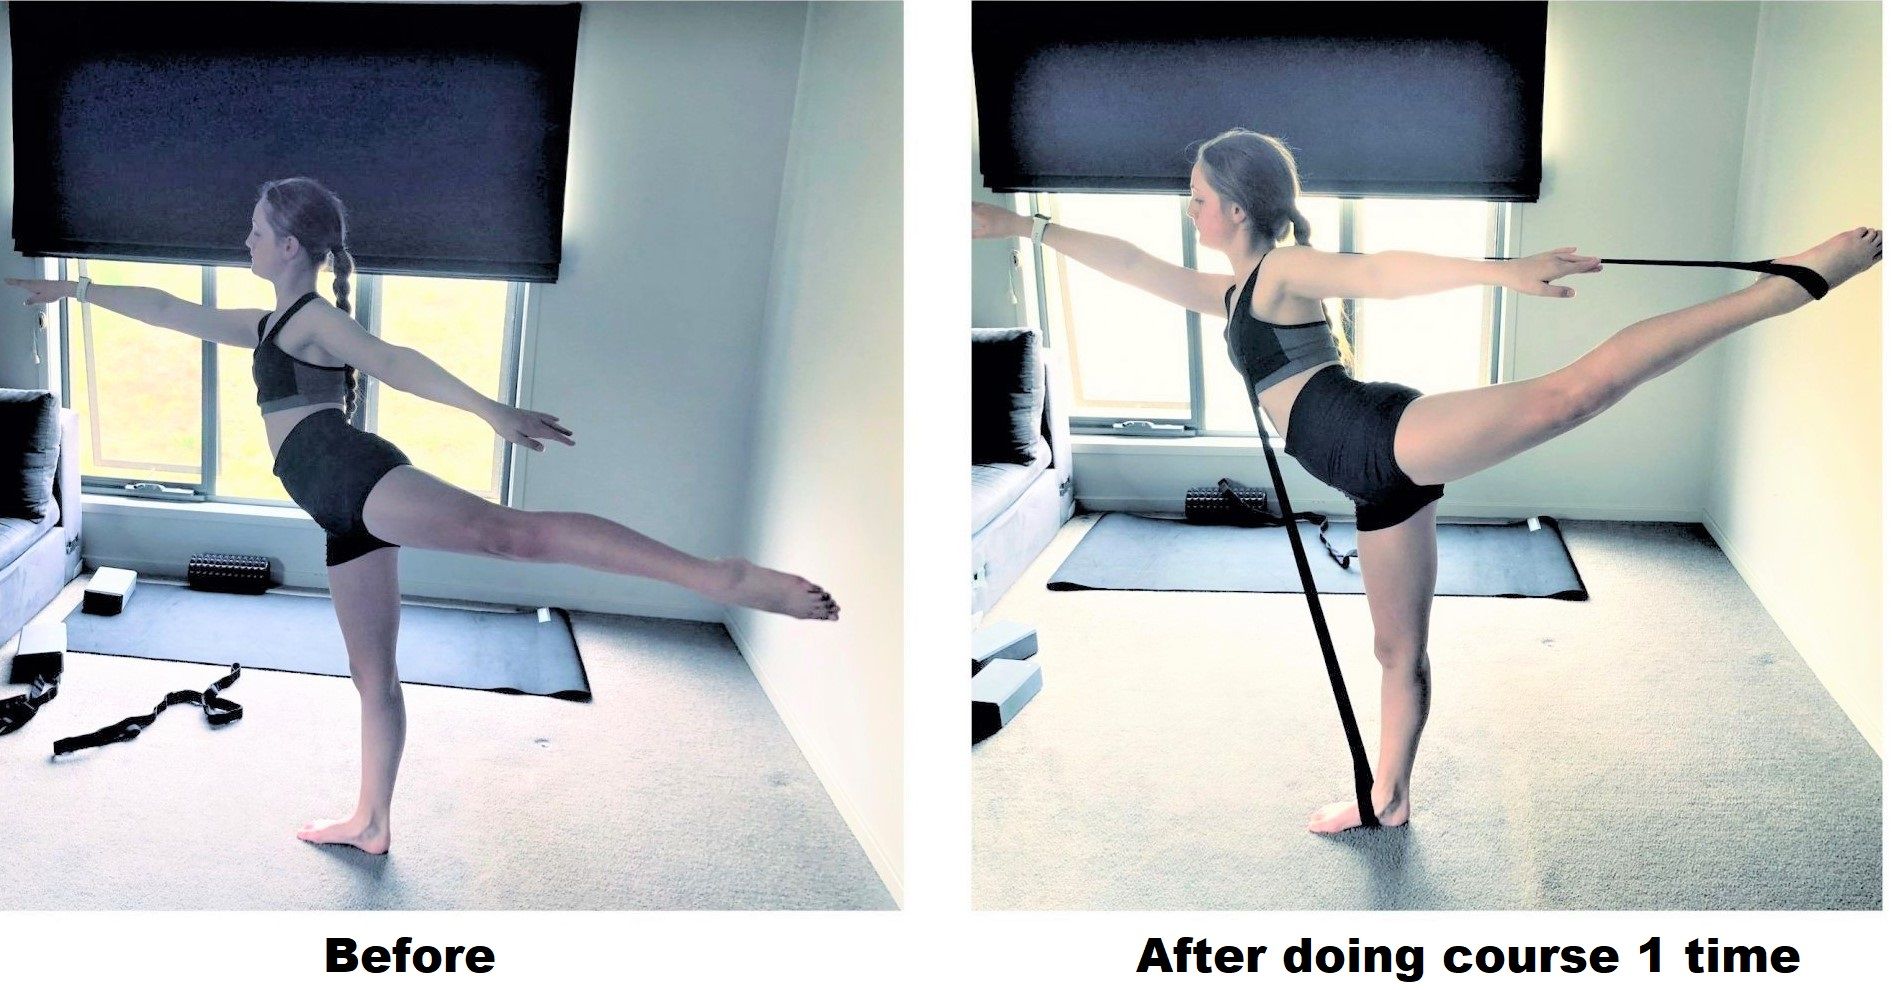 Before & after to support dancer's testimonail arabesque much higher in after photo using Stacey Stretch Strap a